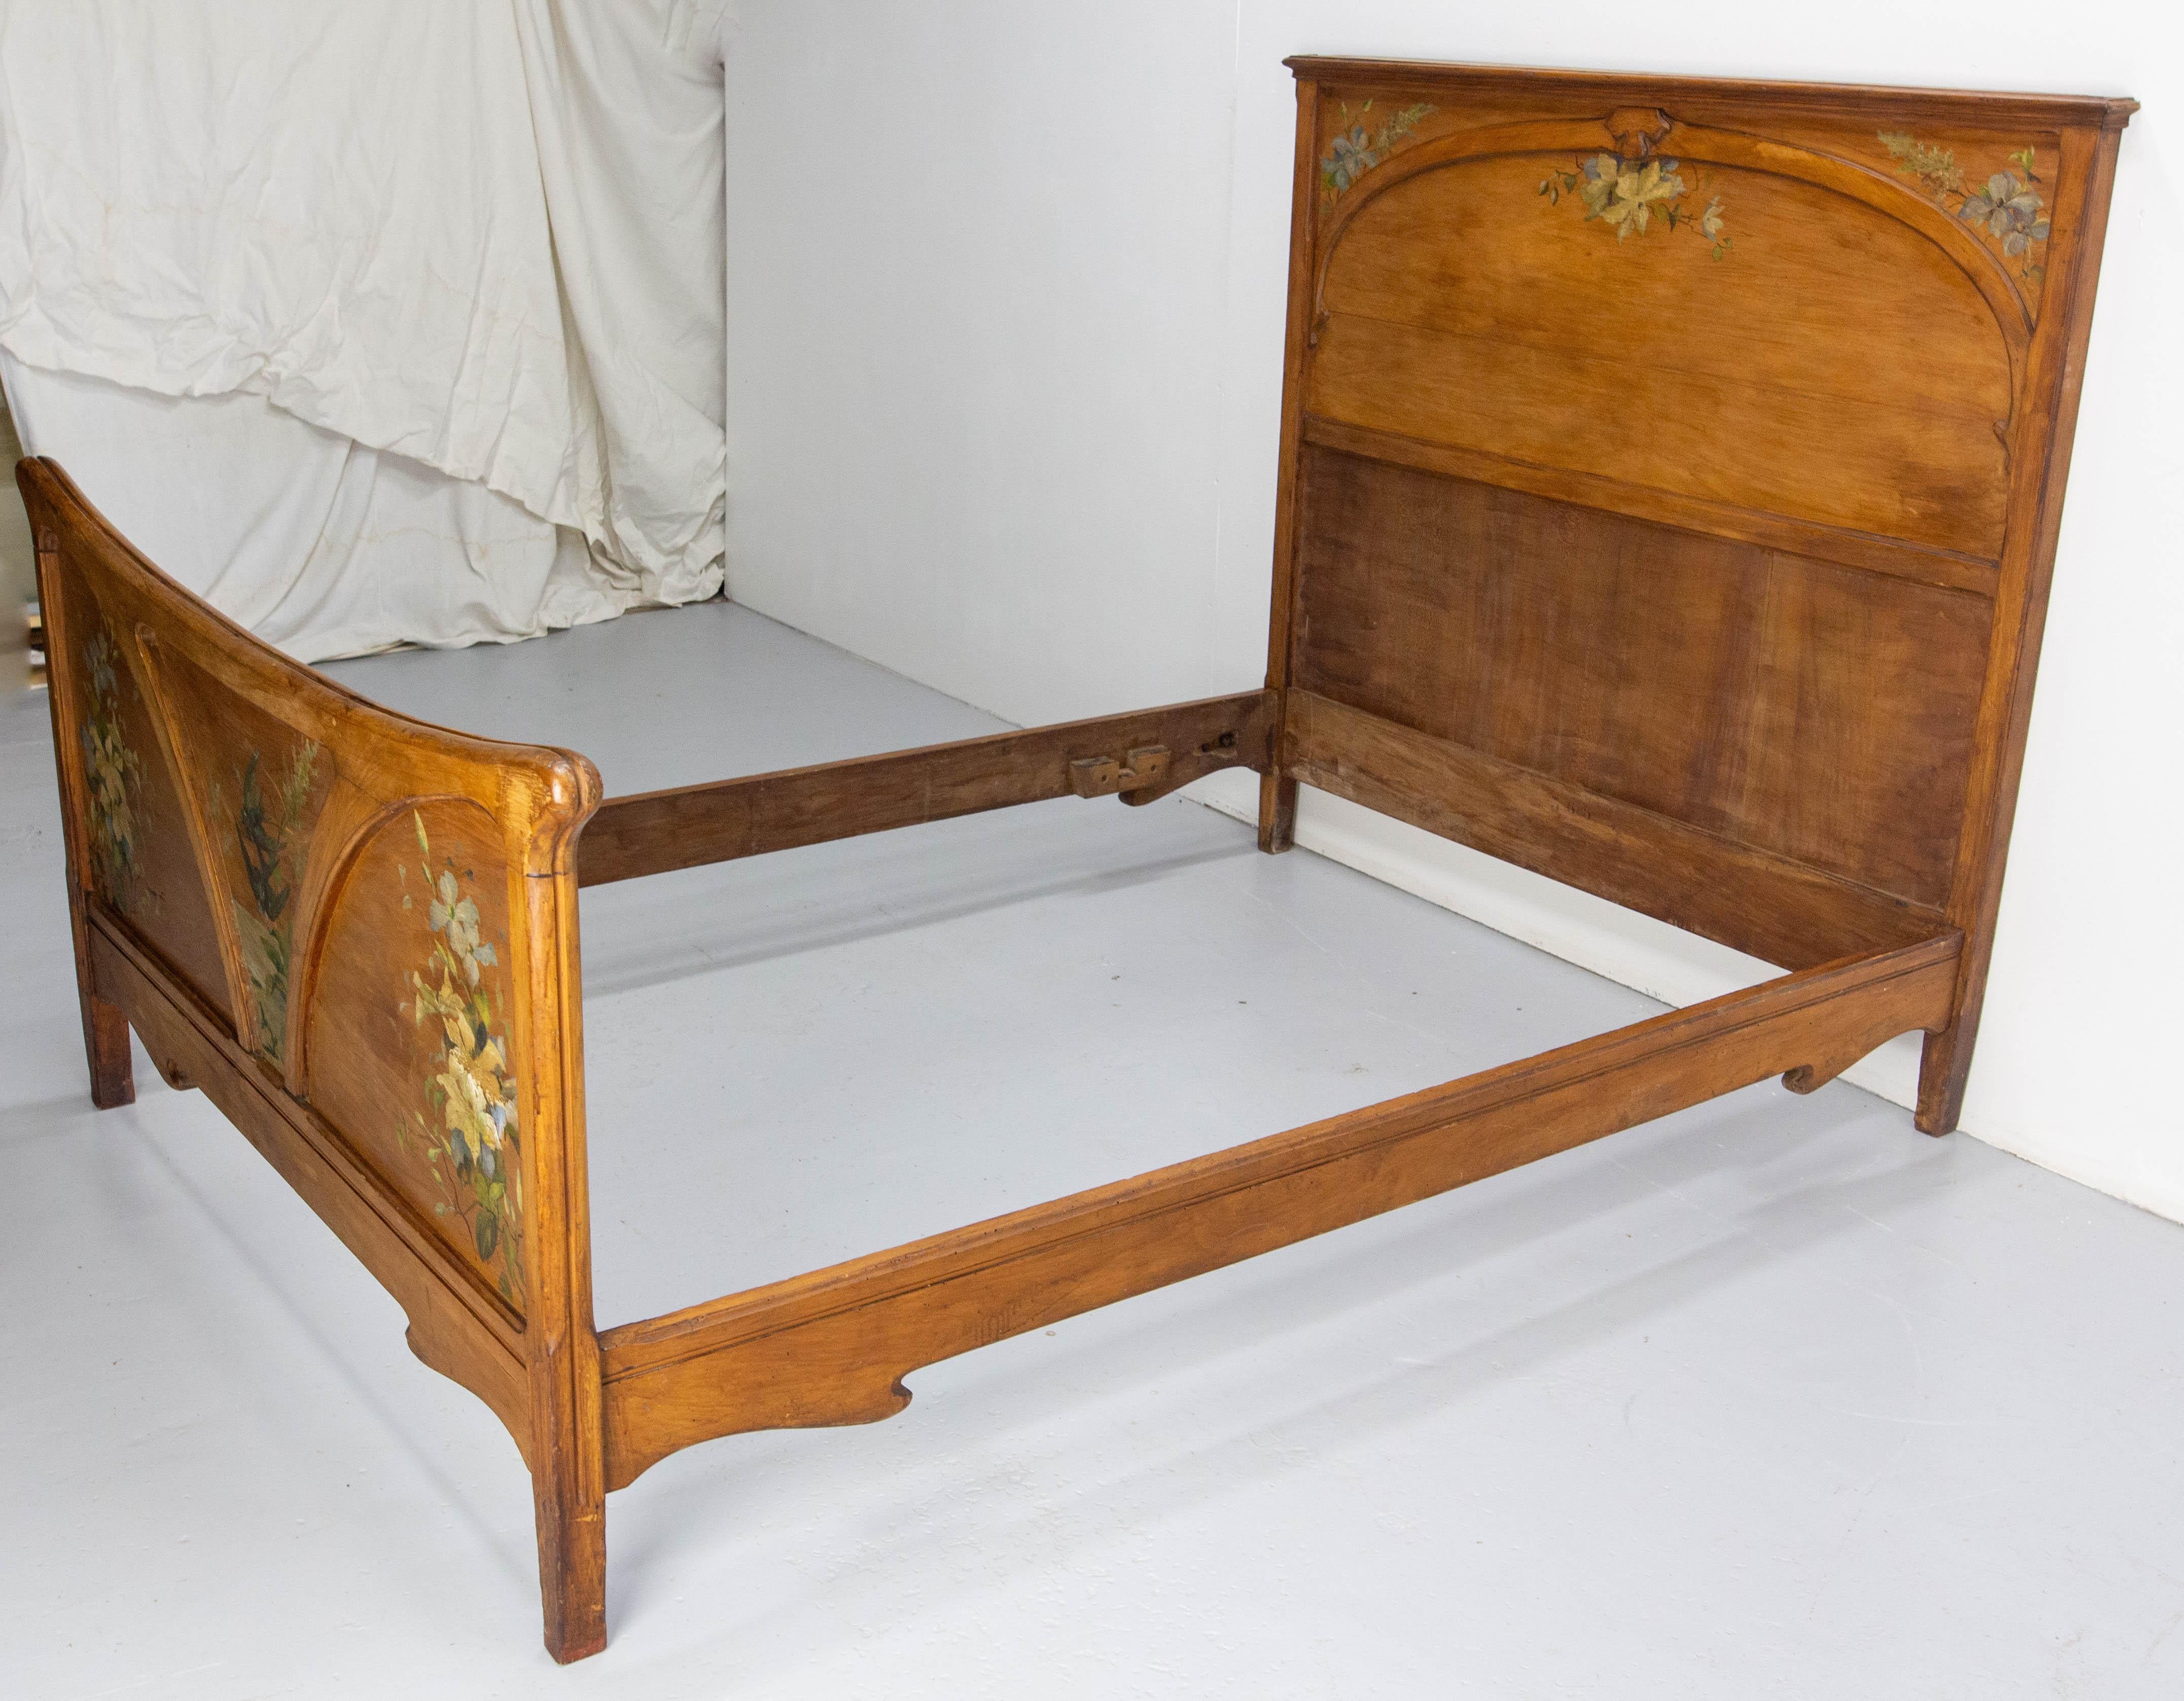 French Art Nouveau Painted Massive Beech Bed Full Size or Double Bed, circa 1890 In Good Condition For Sale In Labrit, Landes